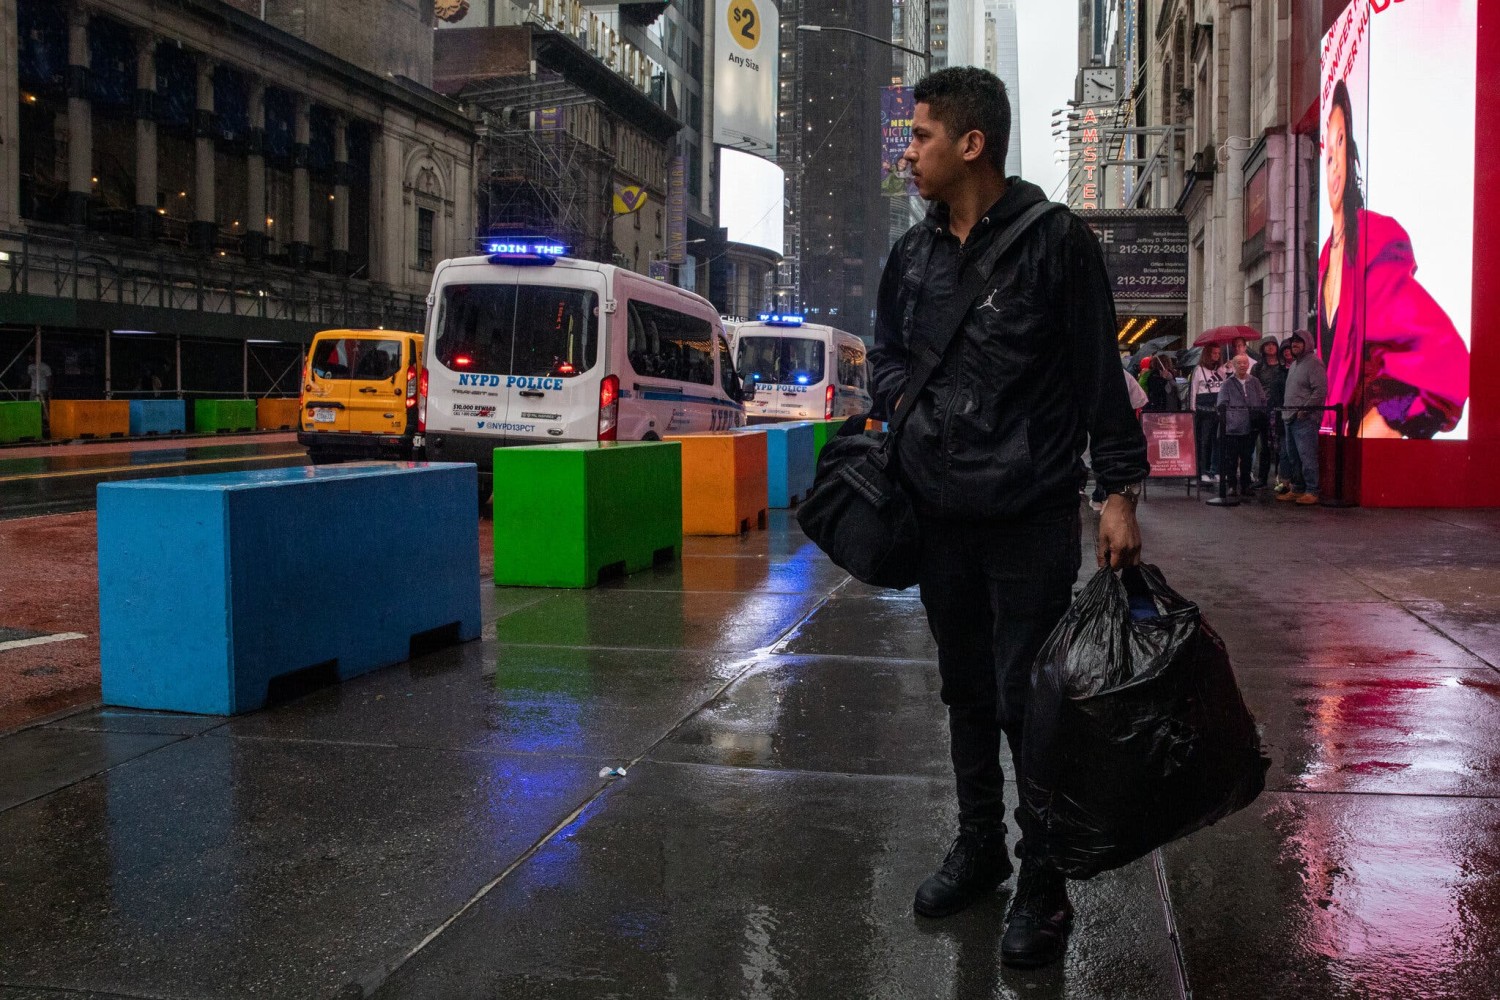 David Morales, 30, who had been living in the Candler Building in Manhattan, is among the migrants who must reapply to remain in city shelters.Credit...Sara Hylton for The New York Times